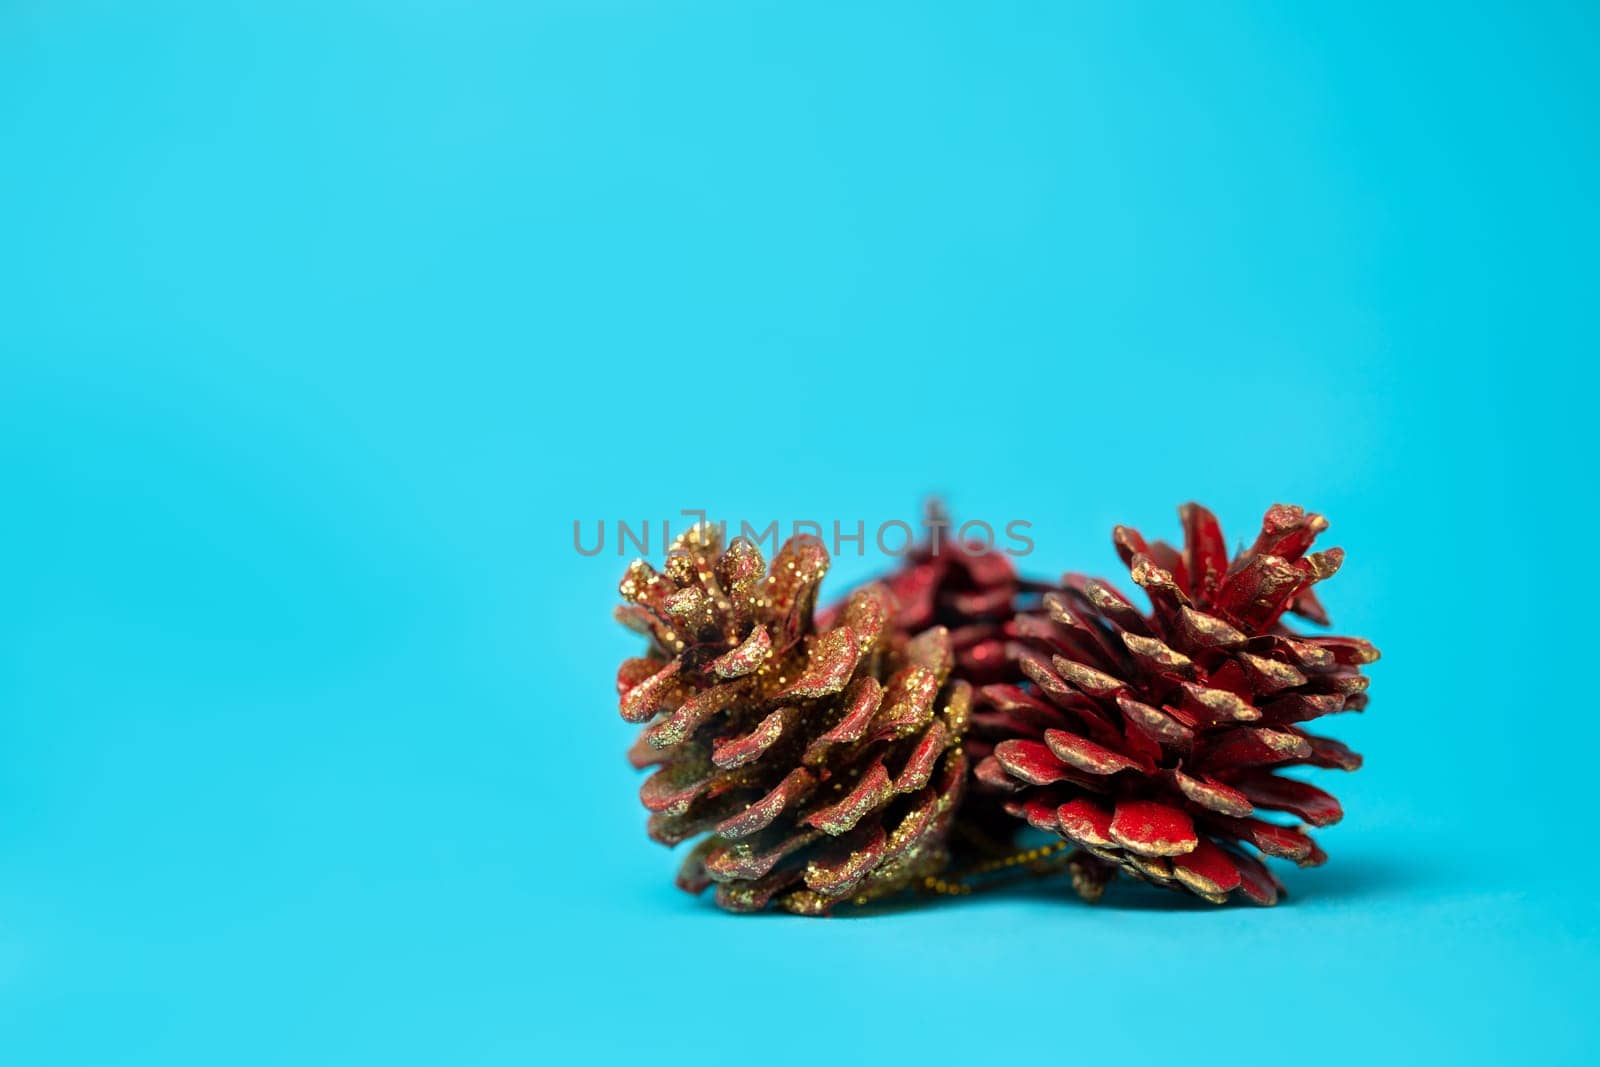 christmas pine cones on a blue background.